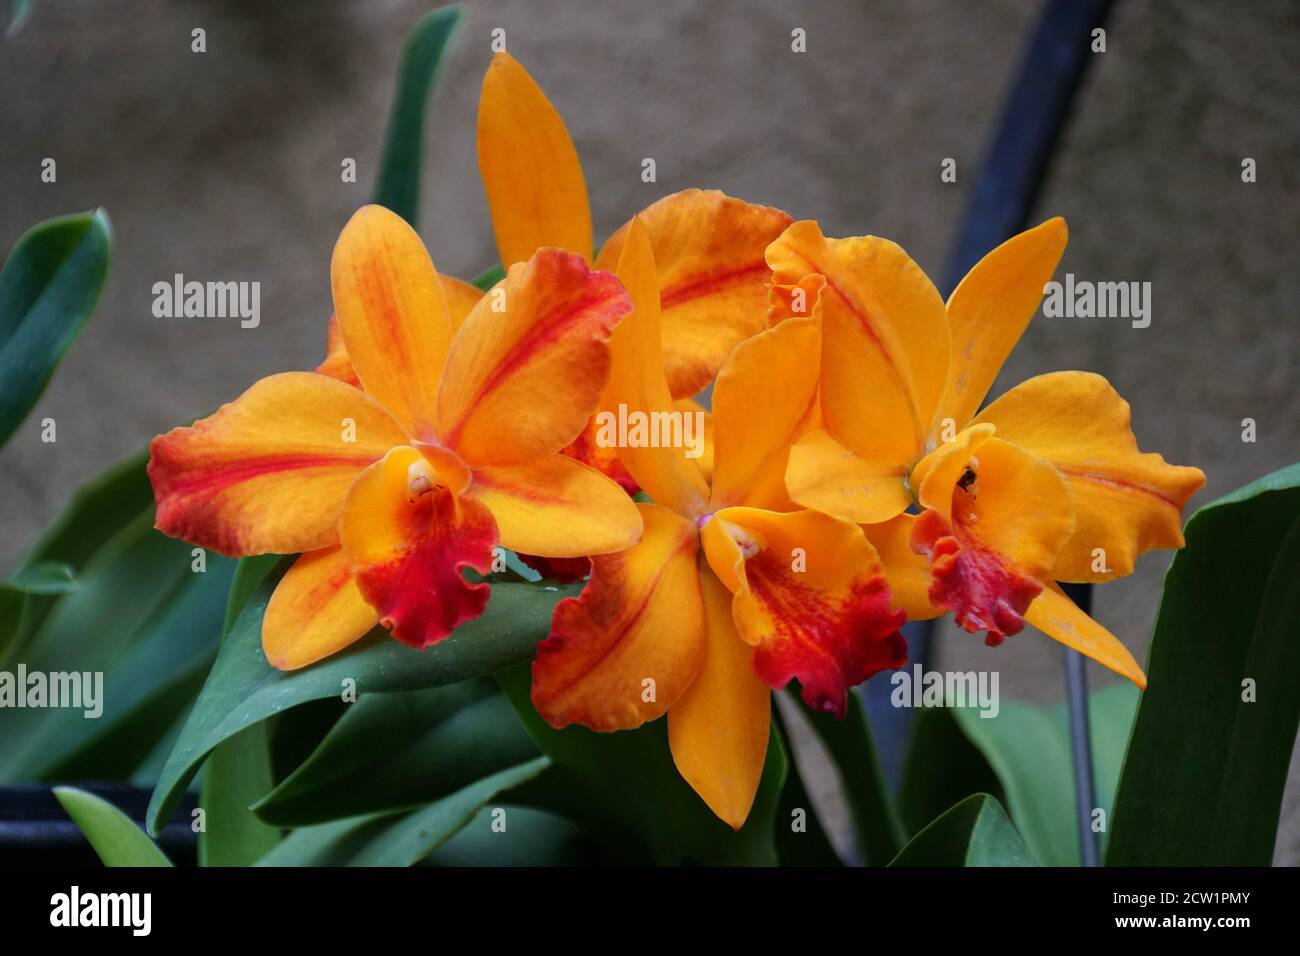 Beautiful and stunning orange and red color of cattleya orchid flowers Stock Photo